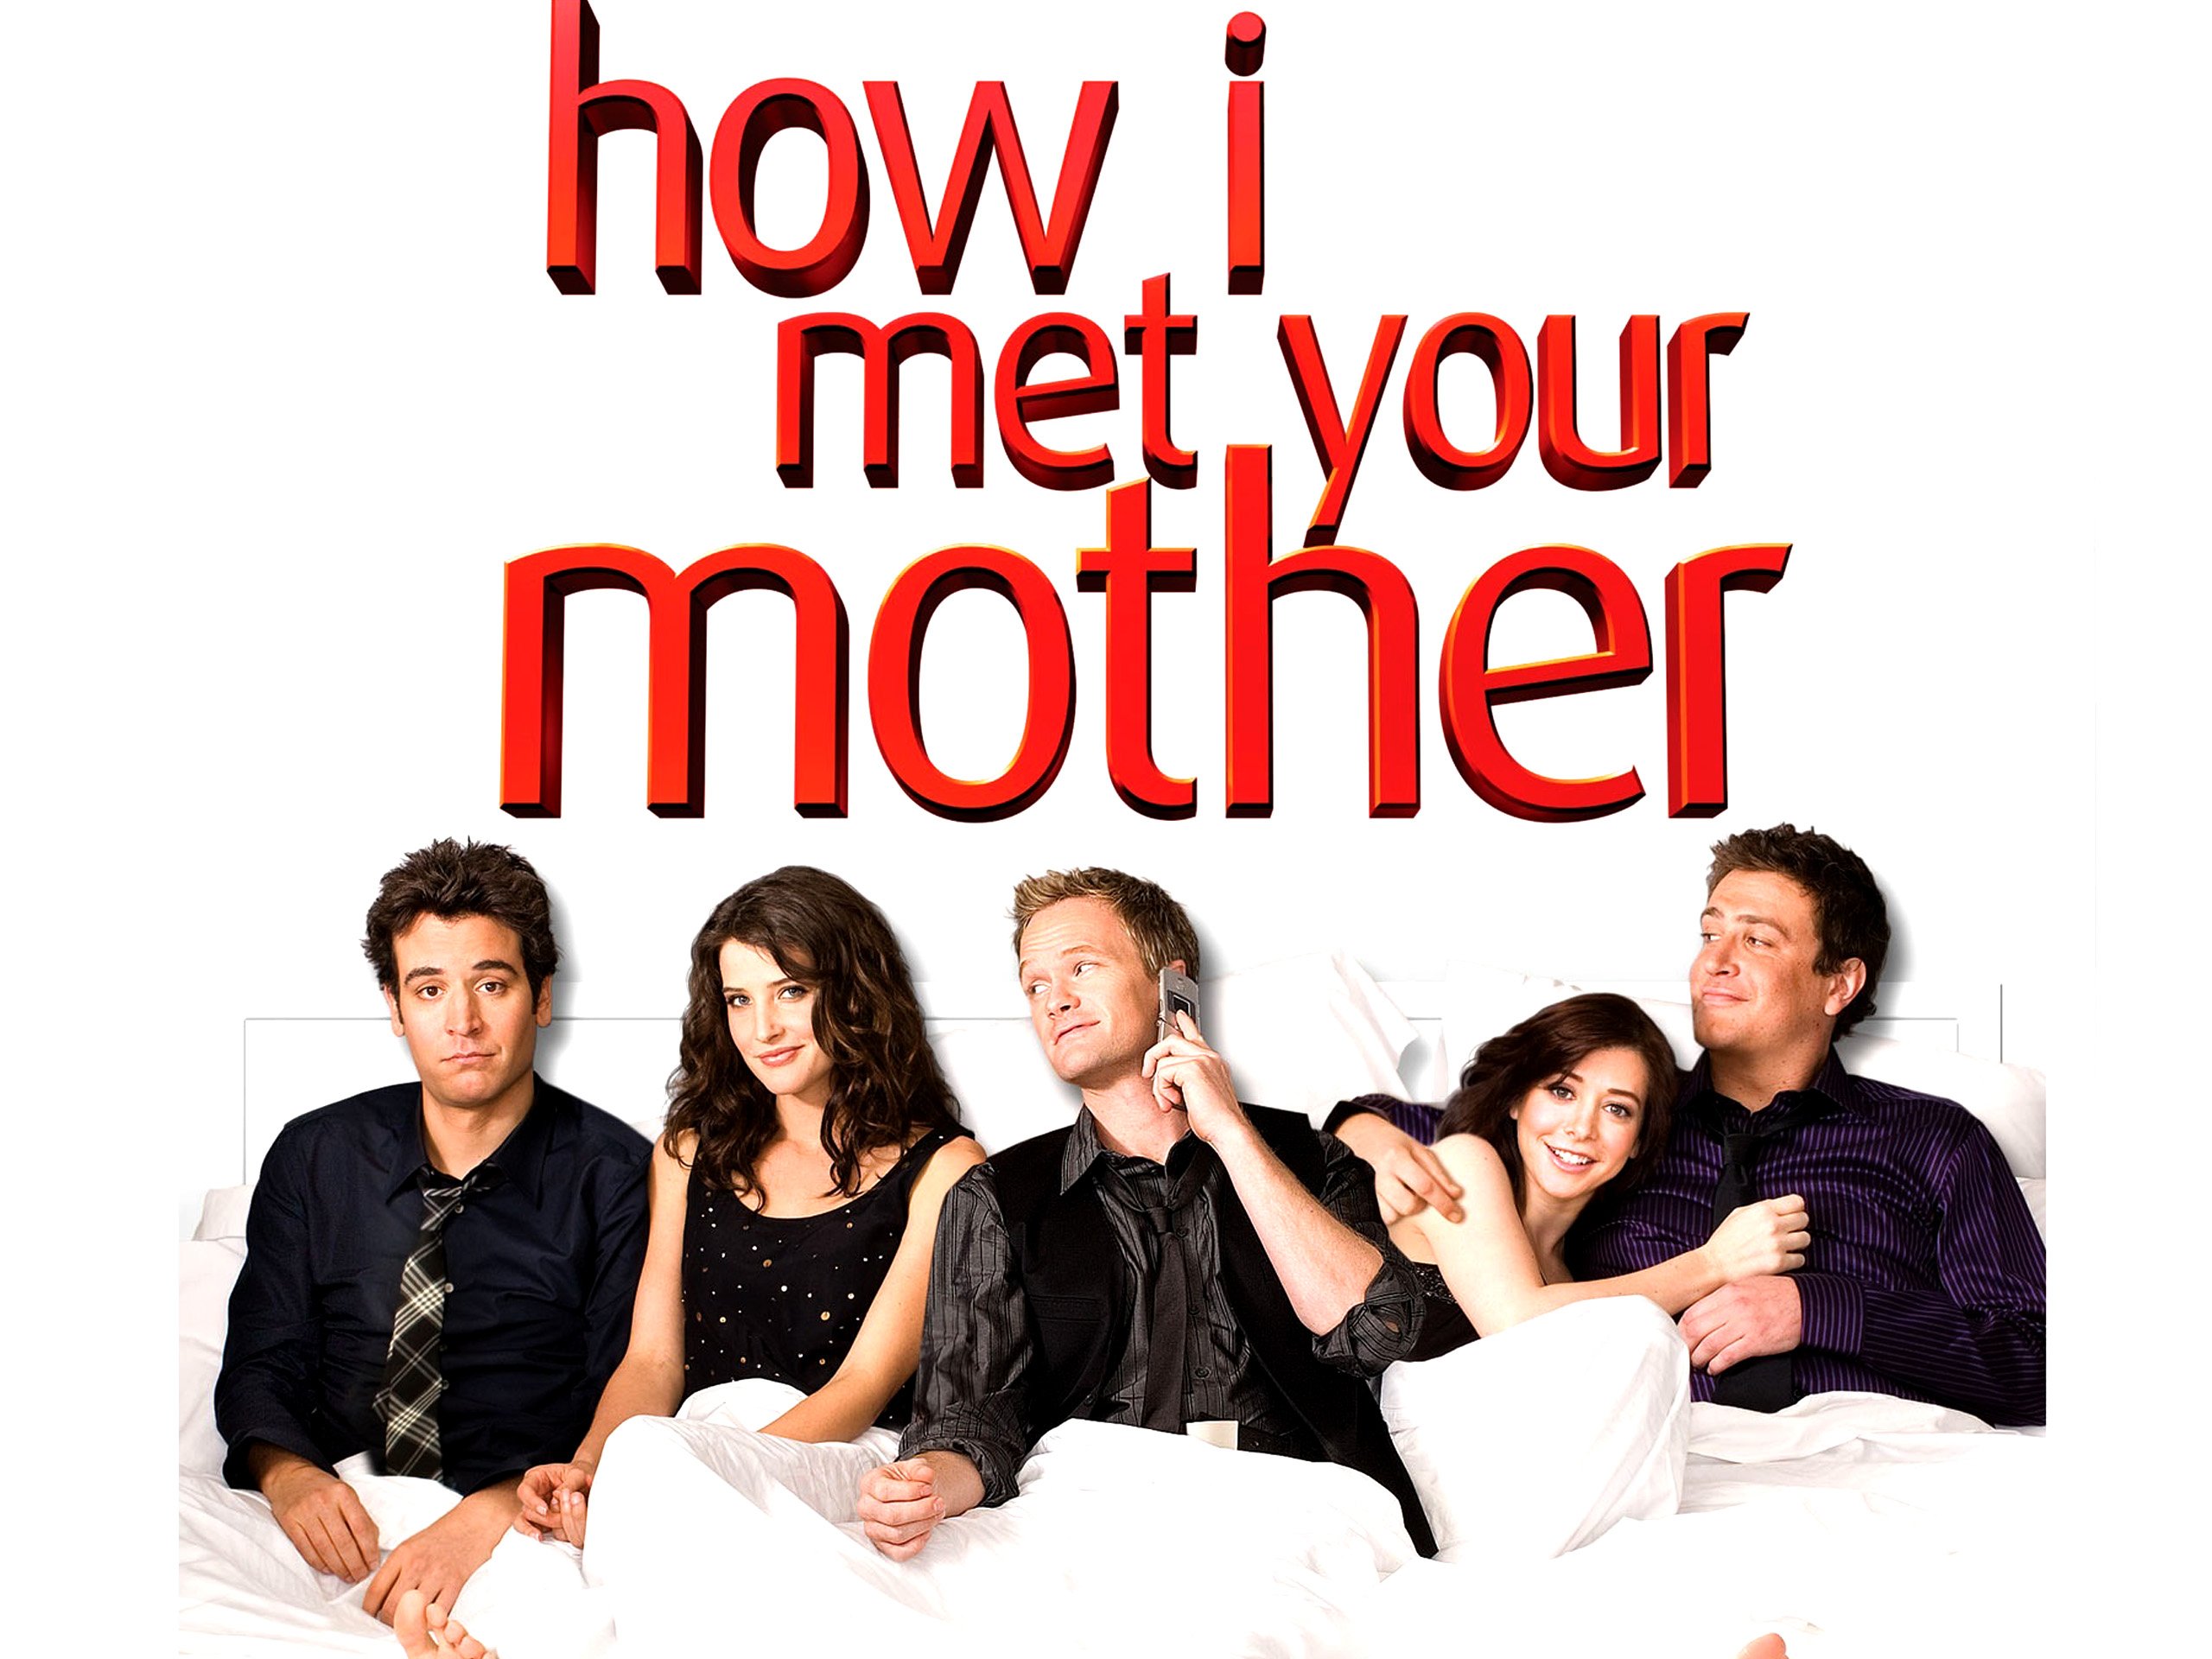 how i met your mother, Comedy, Sitcom, Series, Television, How, Met, Mother,  1 Wallpaper